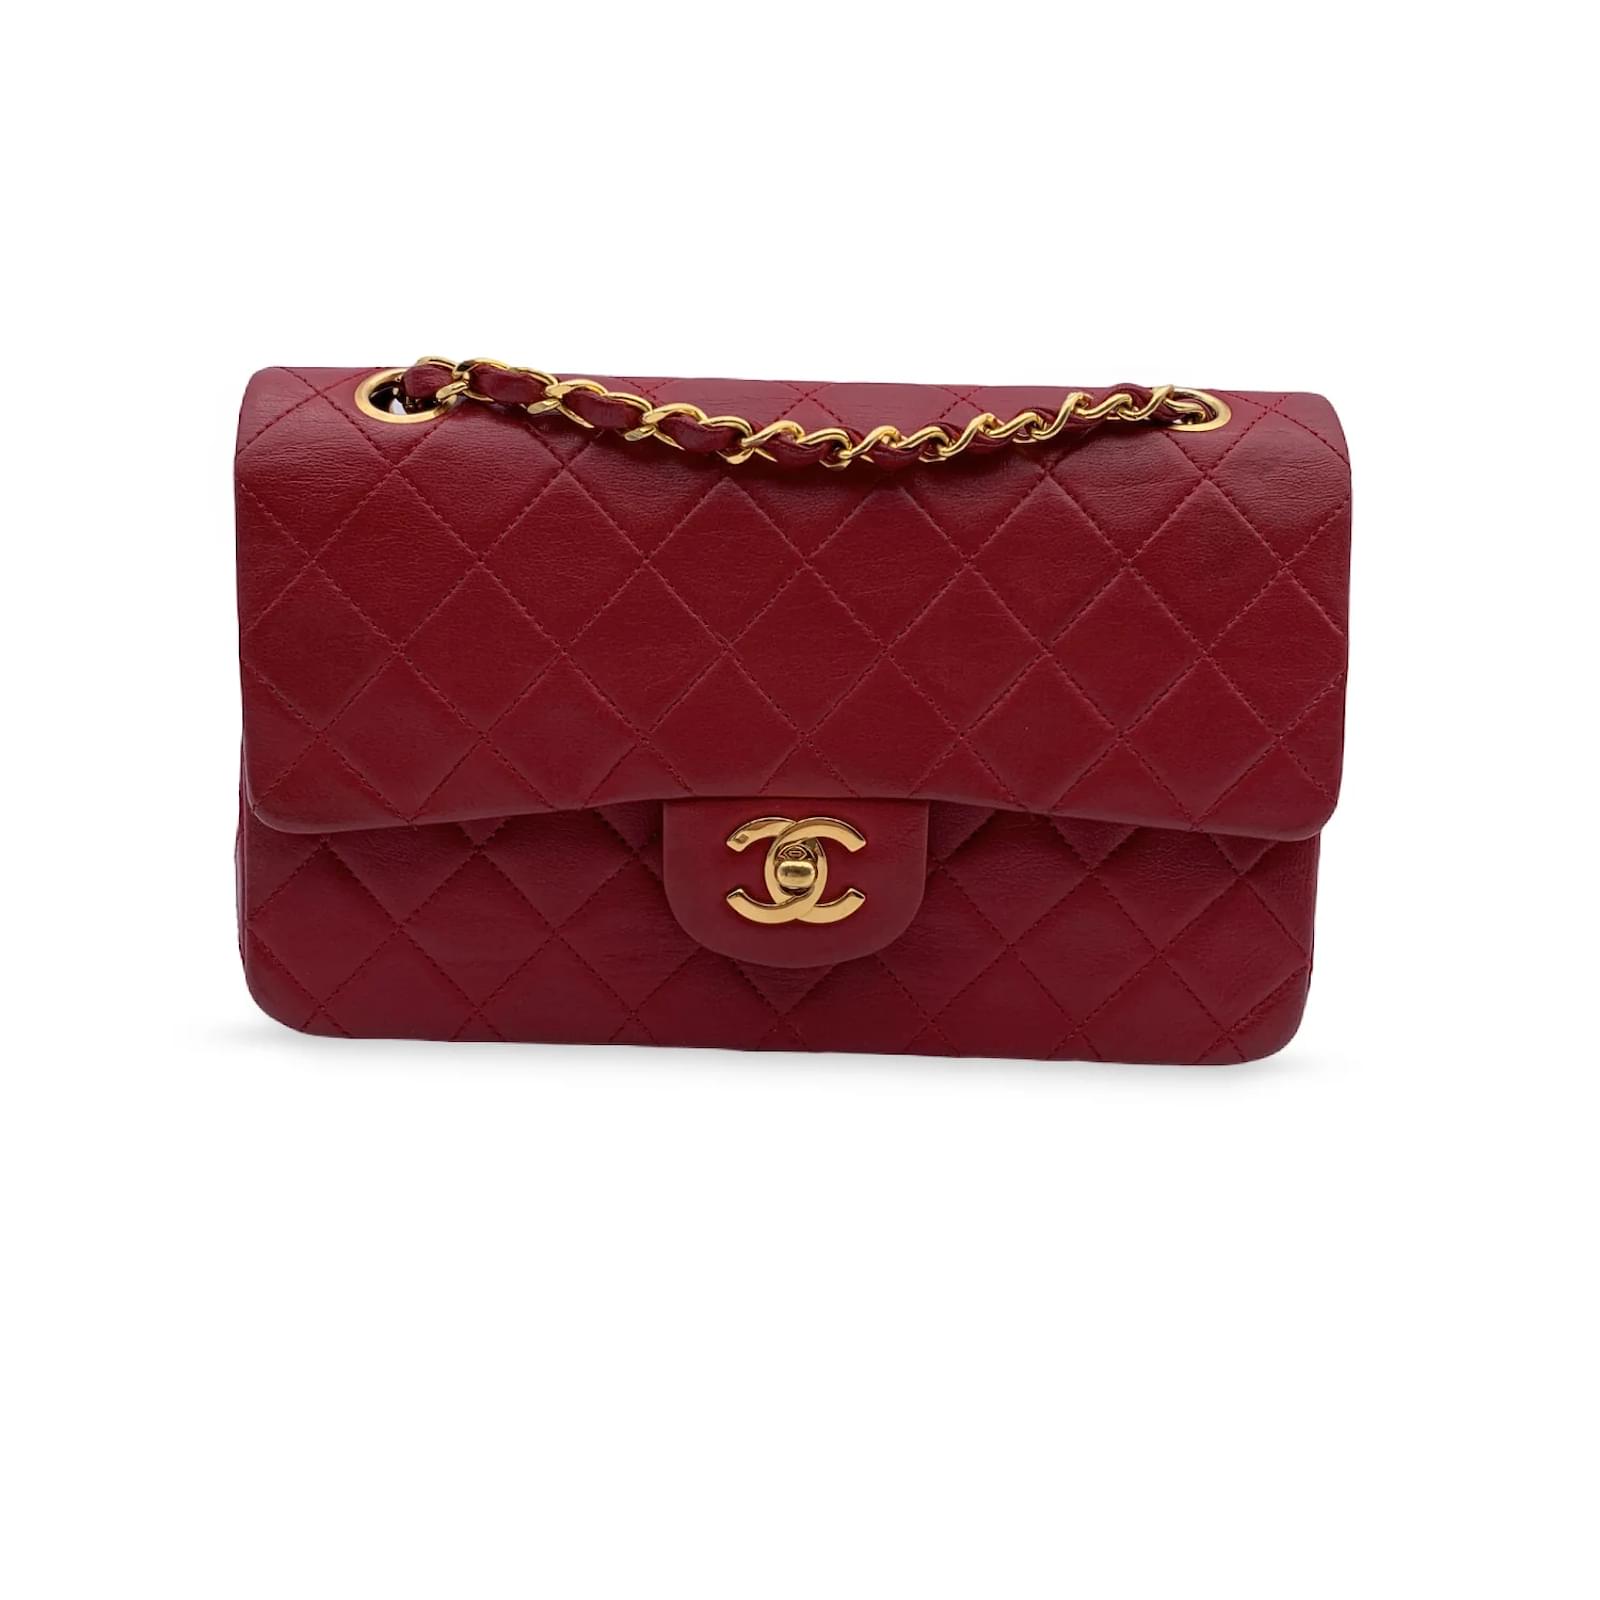 Handbags Chanel Vintage Red Quilted Timeless Classic Small 2.55 Bag 23 cm